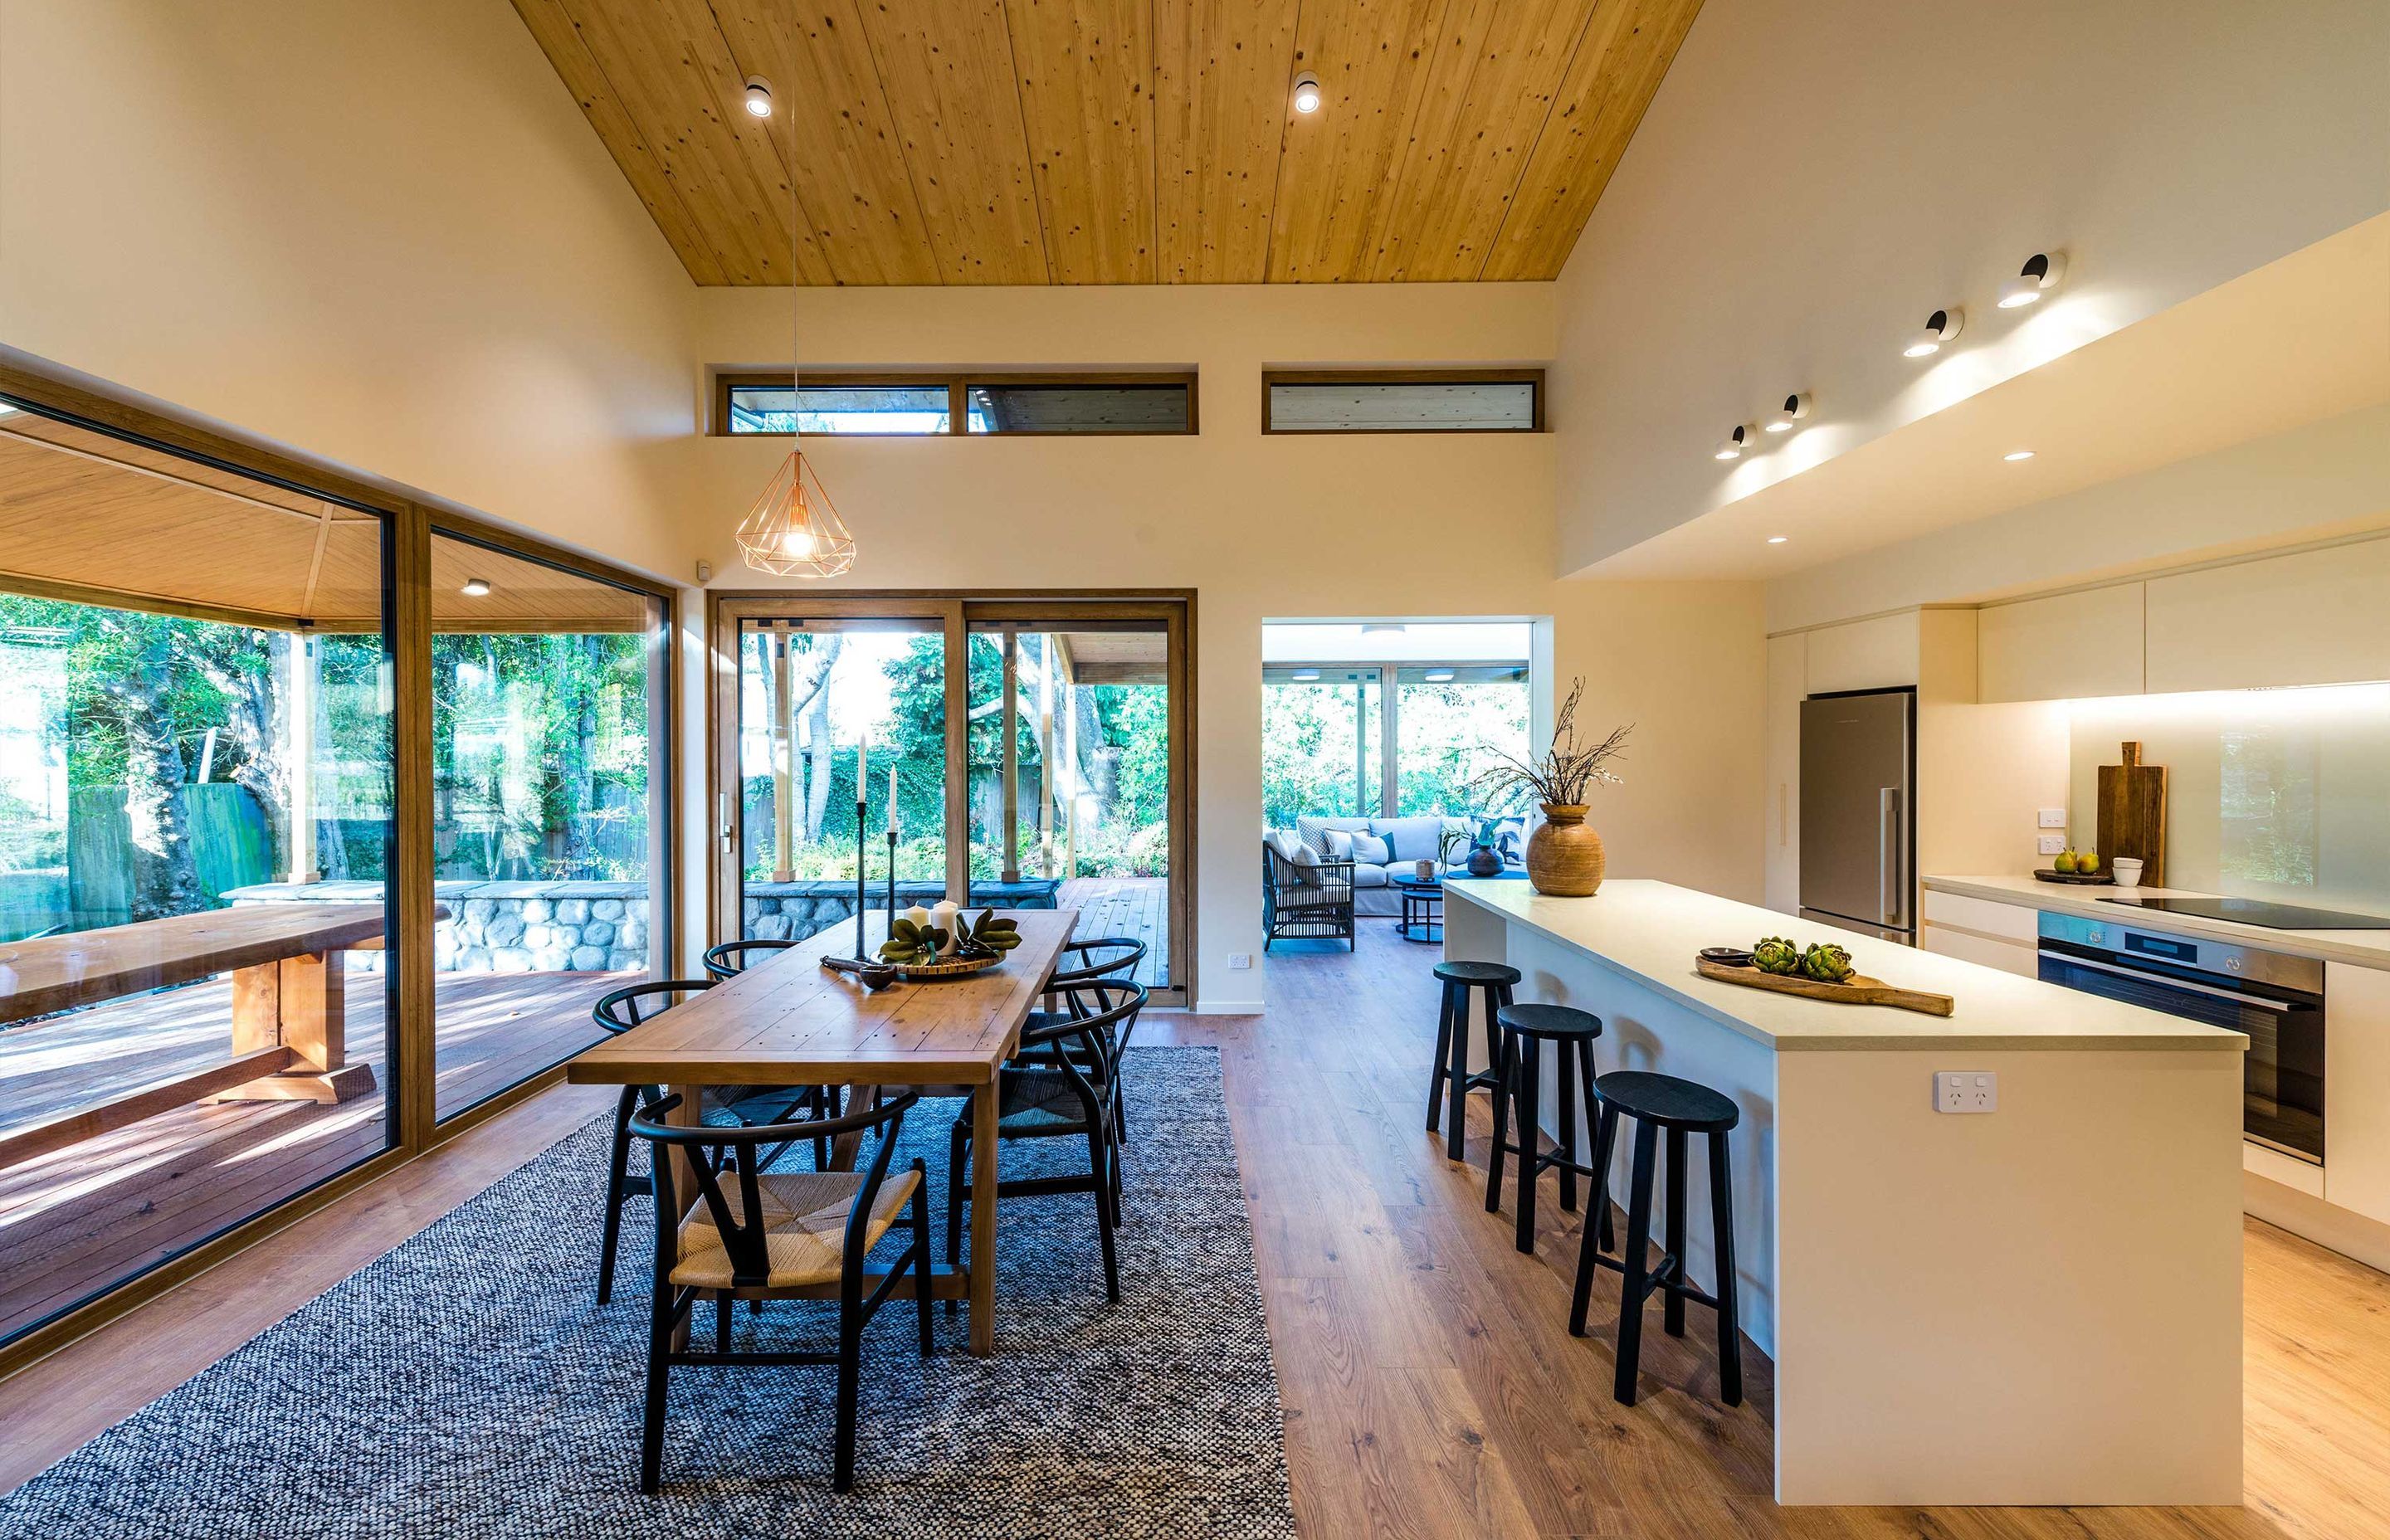 Kitchen dining looking towards sunroom. The ceiling is structural solid timber panels that have a warm roof on top.